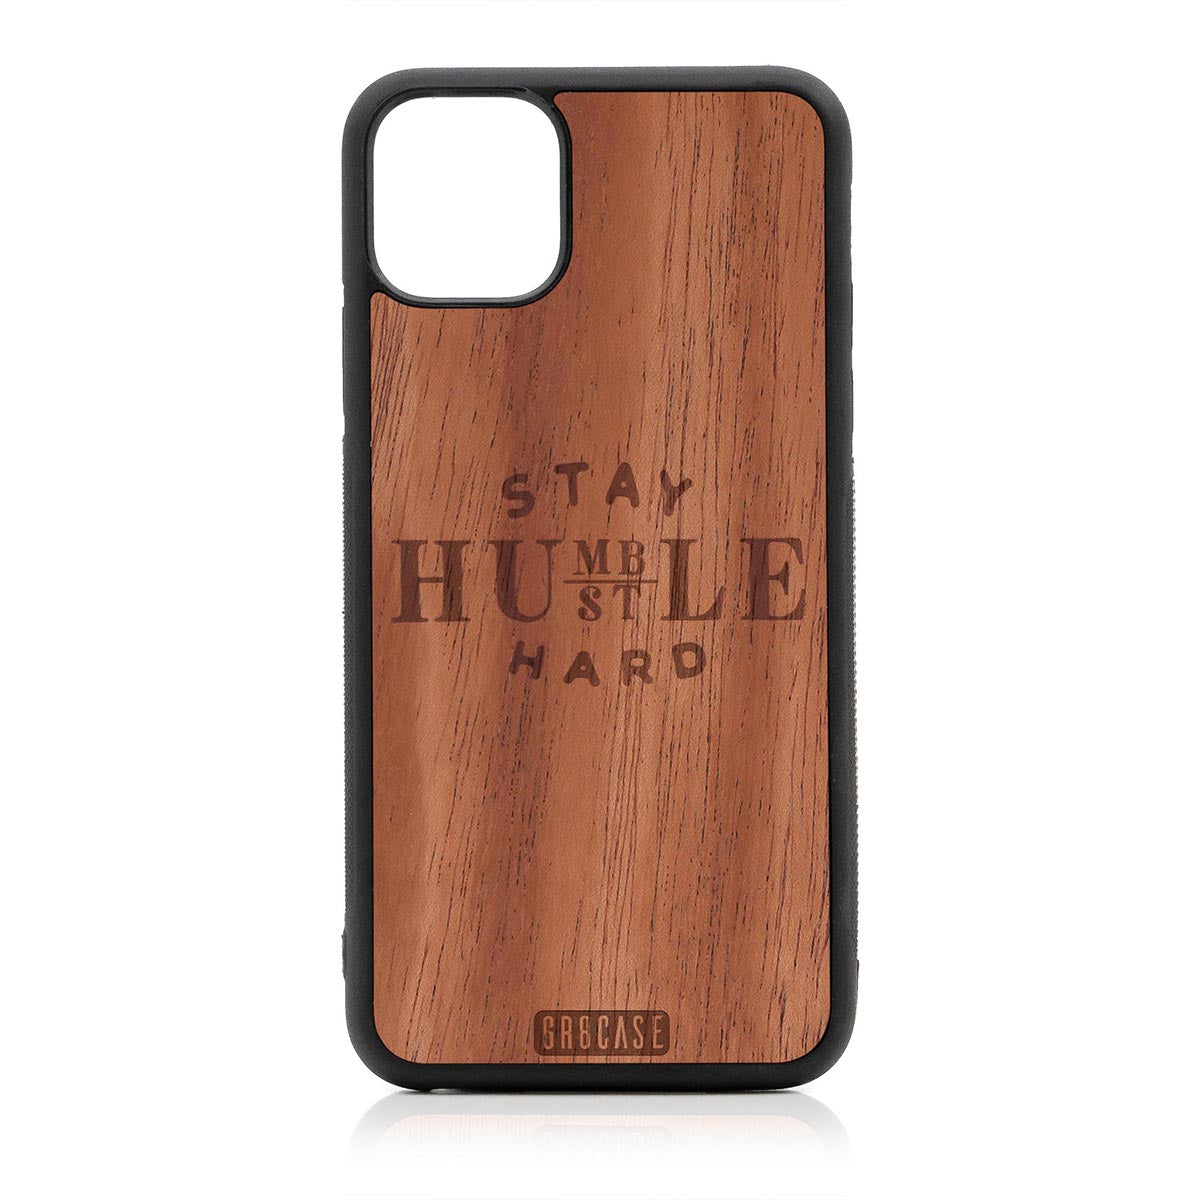 Stay Humble Hustle Hard Design Wood Case For iPhone 11 Pro Max by GR8CASE